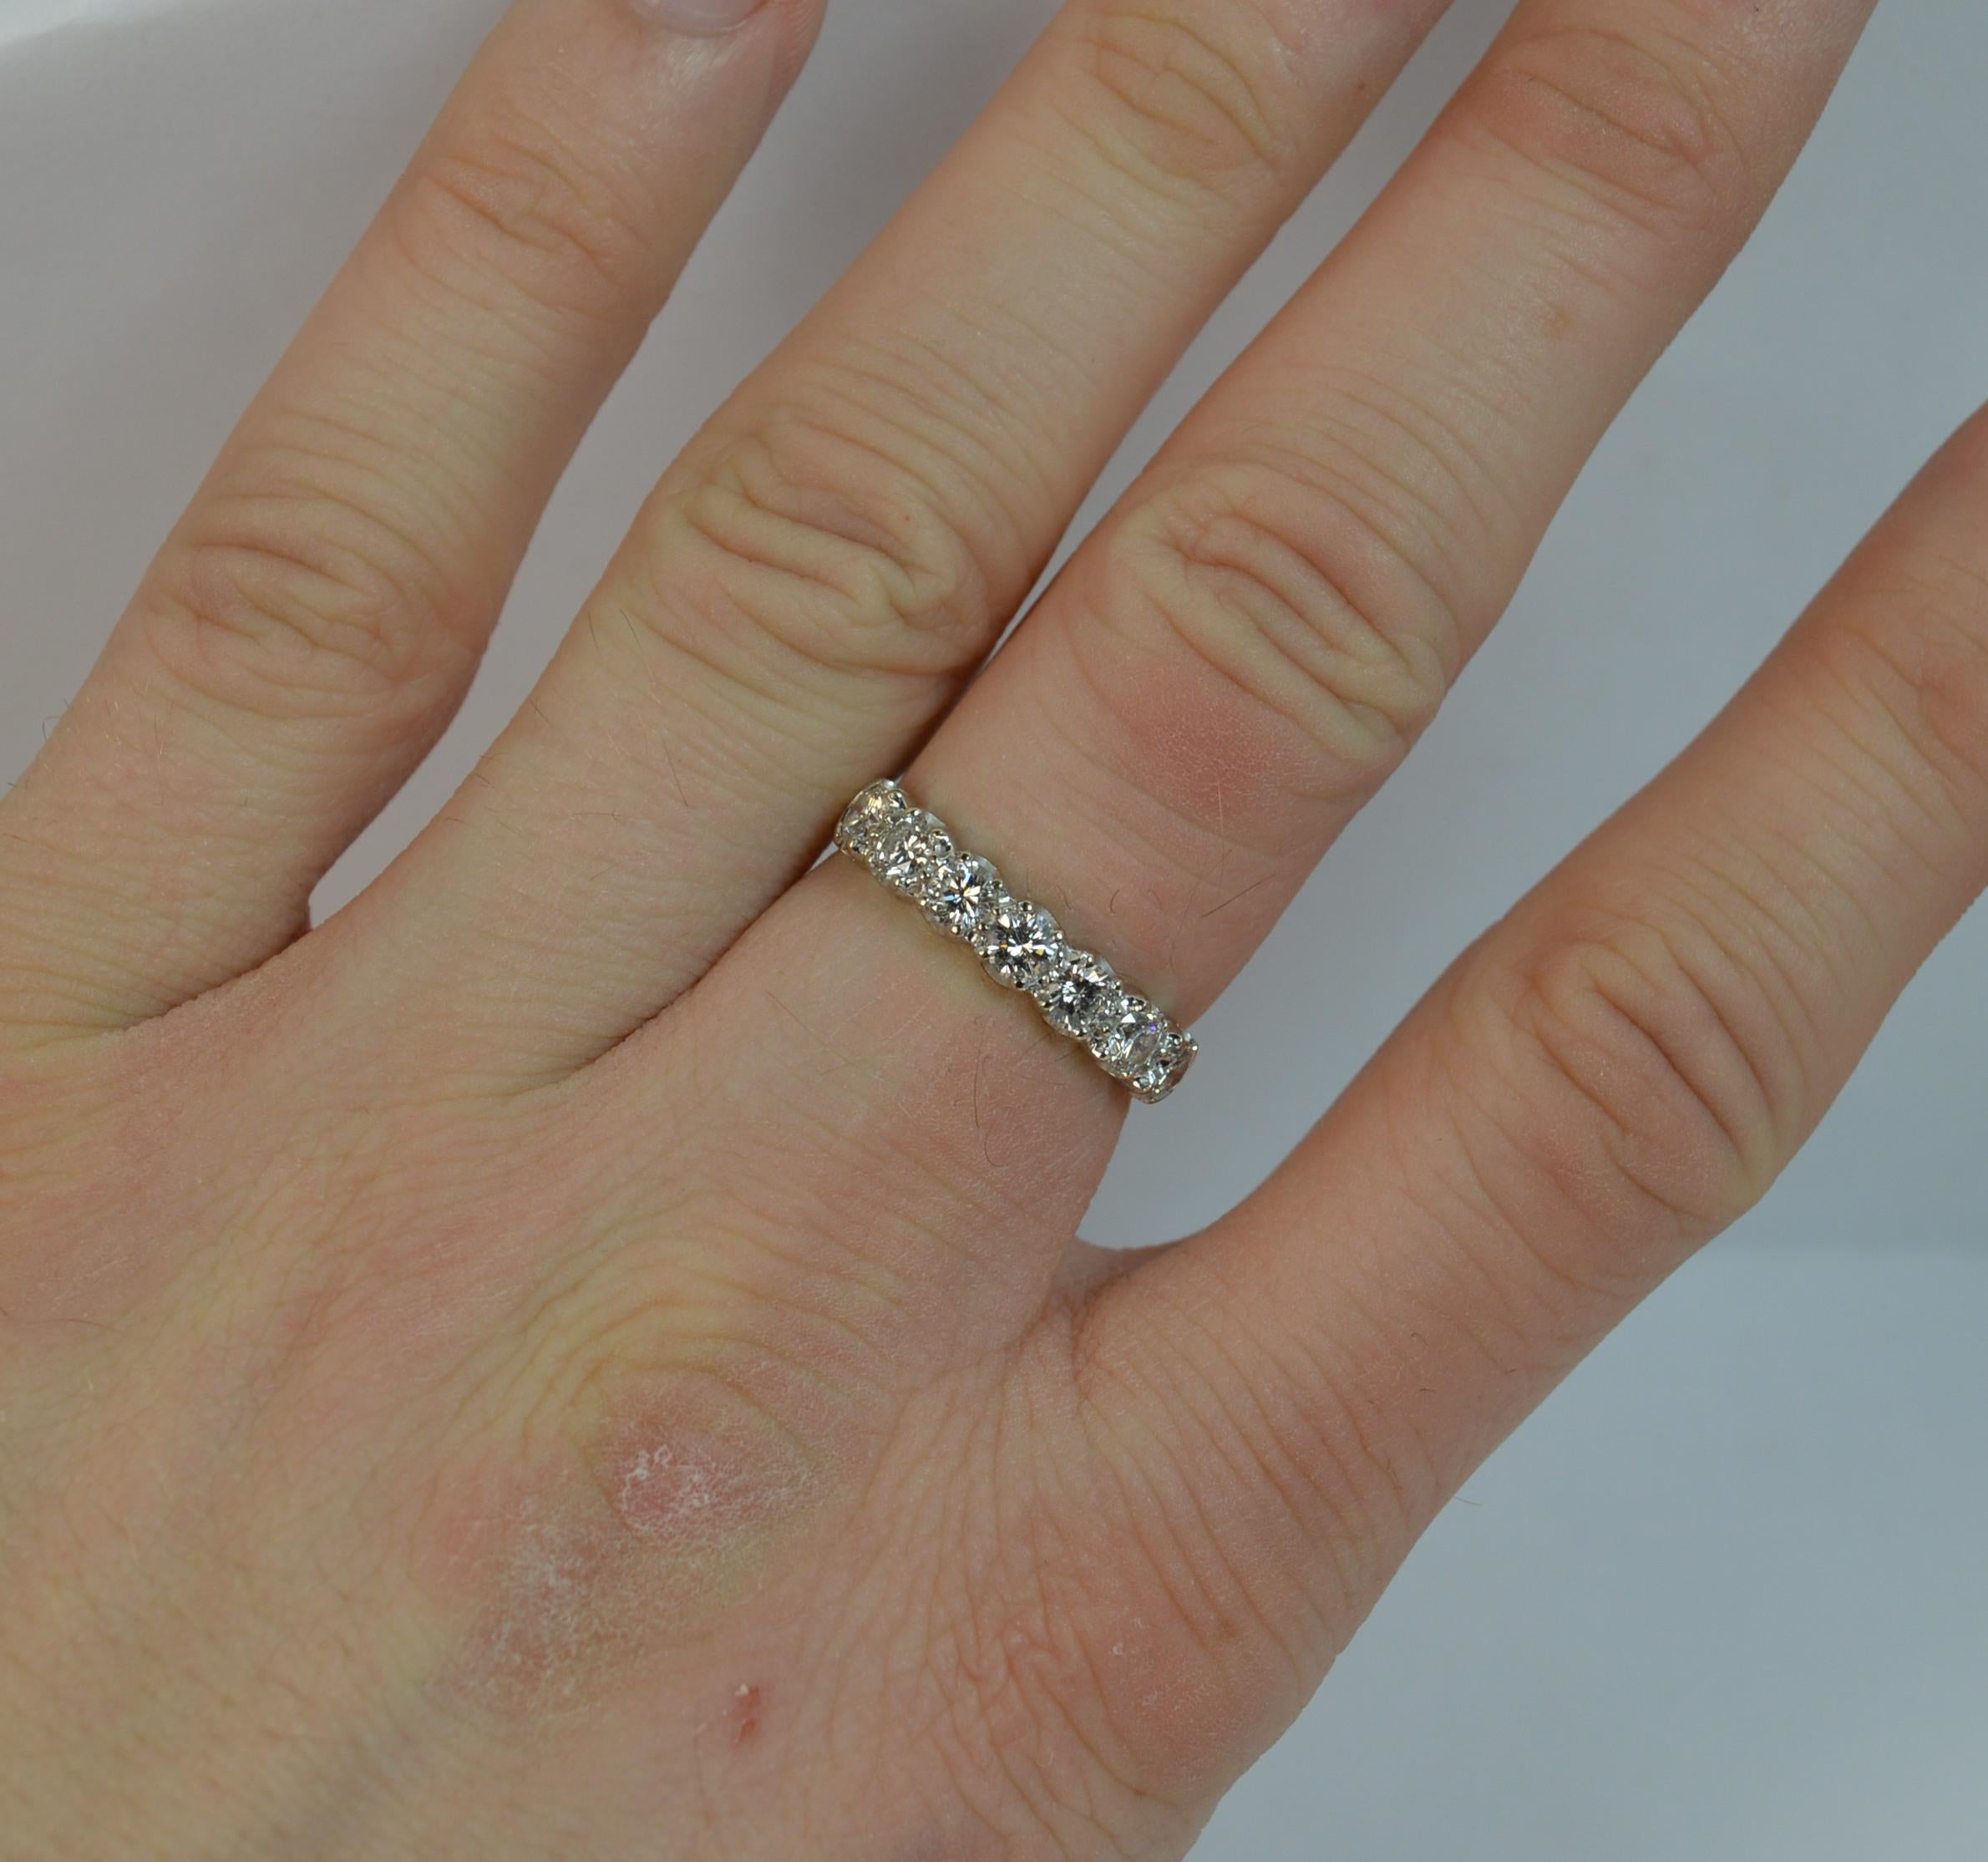 A stunning ladies diamond half eternity stack ring.
SIZE ; N 1/2 UK, 7 US
Solid 18 carat yellow gold shank and white gold head setting.

Set with seven round brilliant cut diamonds. 0.75cts in total. Very clean, bright and sparkly diamonds. Vs